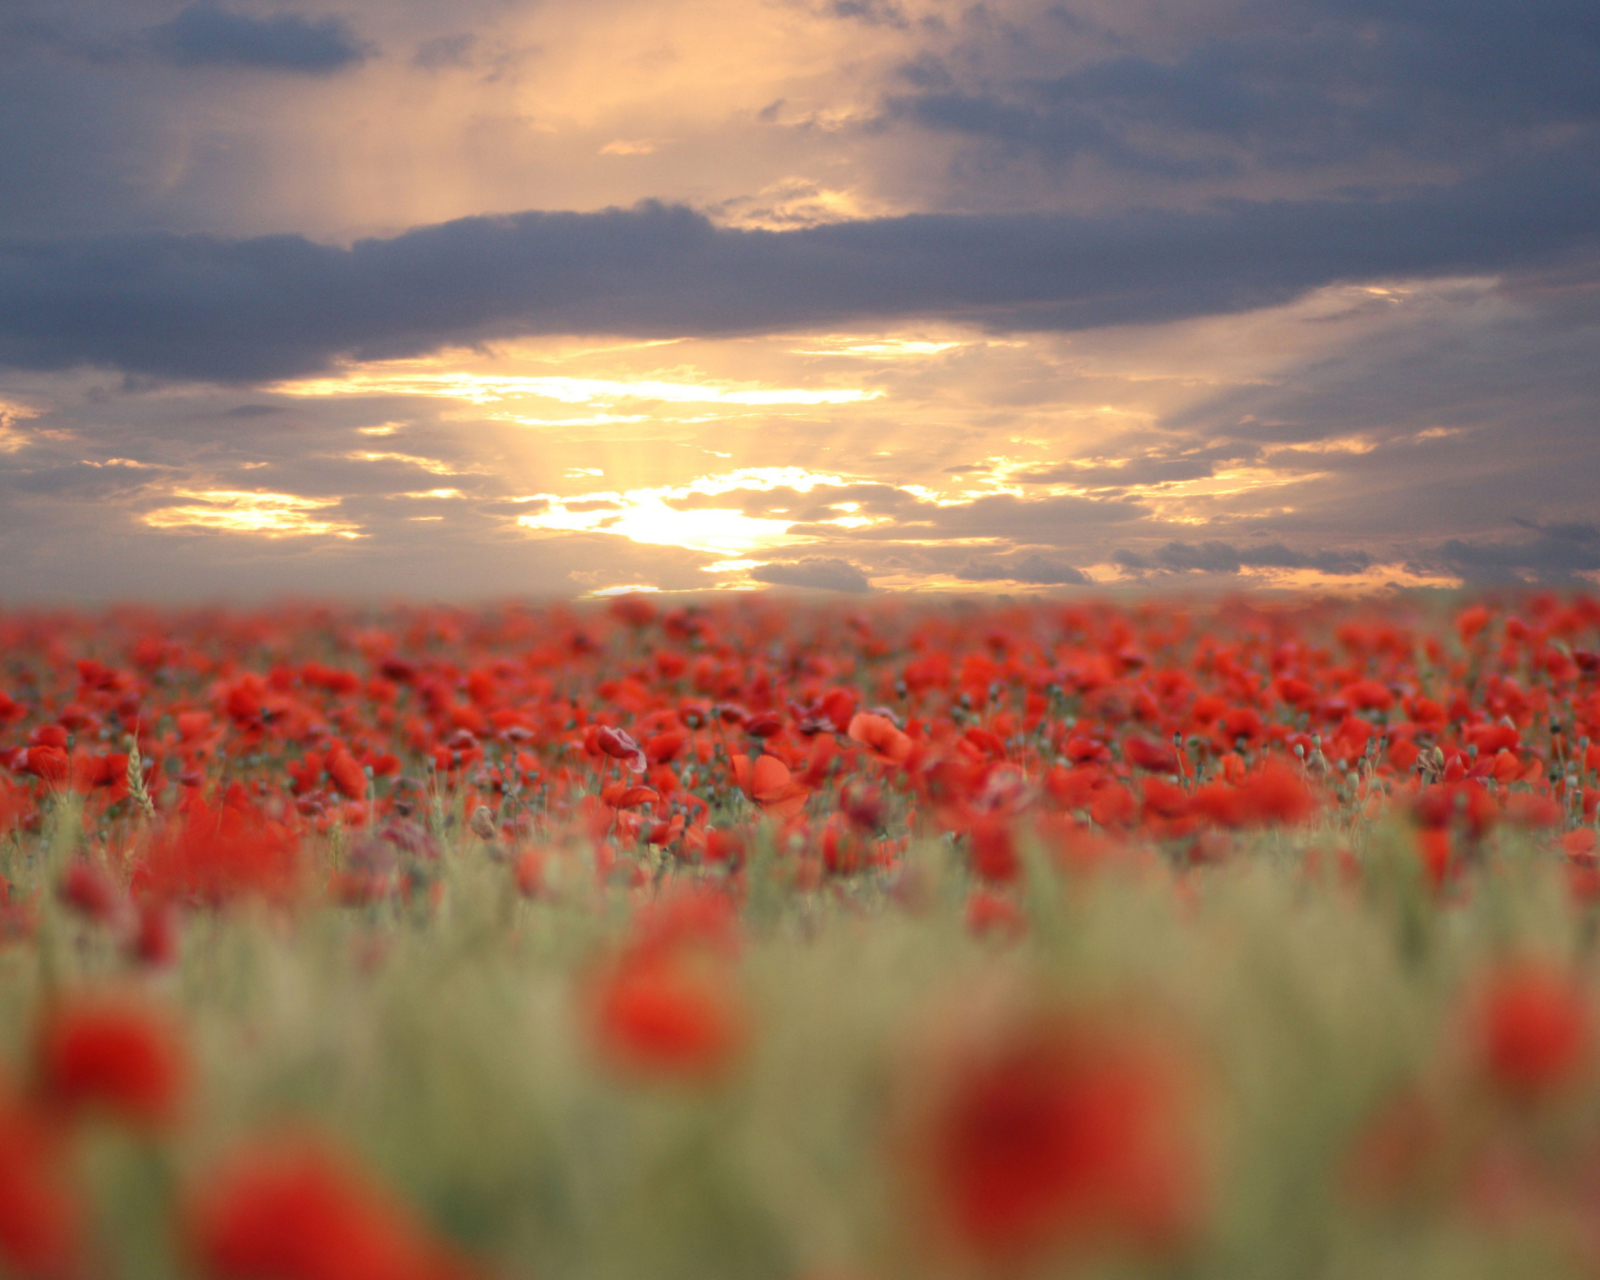 Poppies At Sunset wallpaper 1600x1280